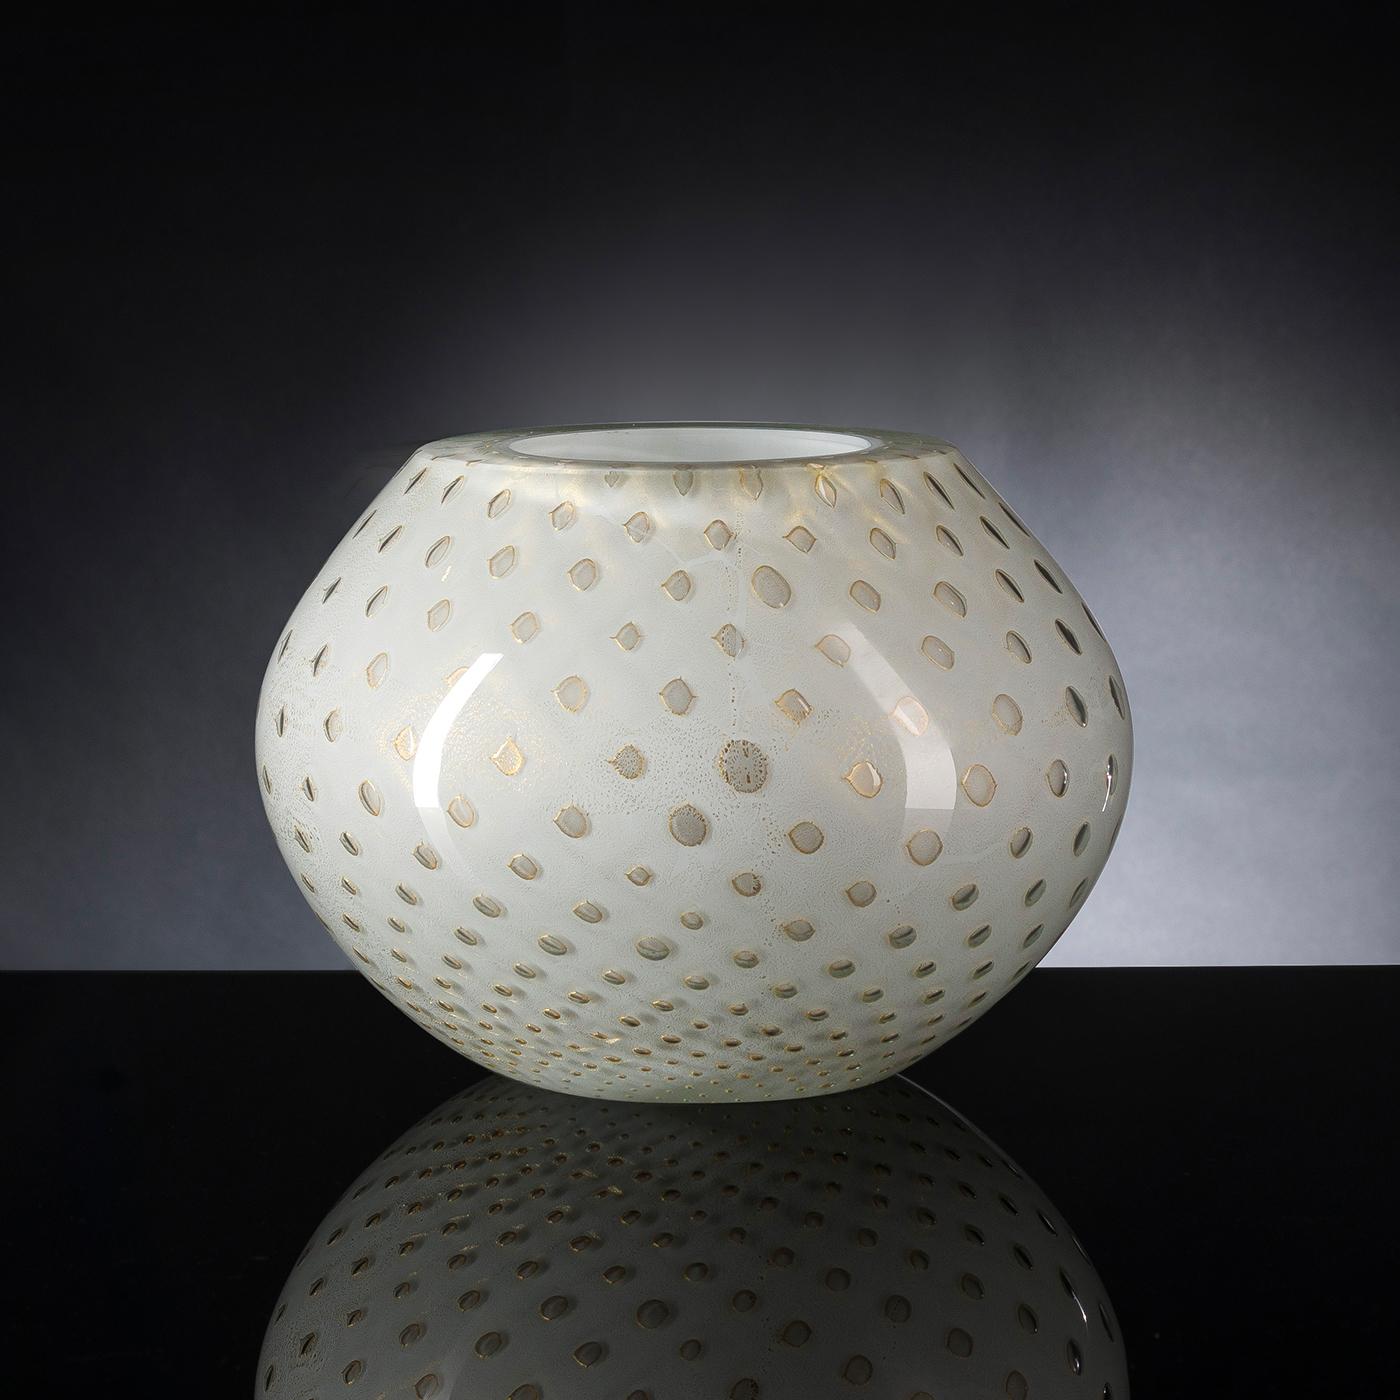 As a standalone accent or part of an elegant display, this vase will add a chic finishing touch to any home. The smooth, curved profile is expertly mouth-blown of white Murano glass, interspersed with small gold-rimmed droplets. Perfect for